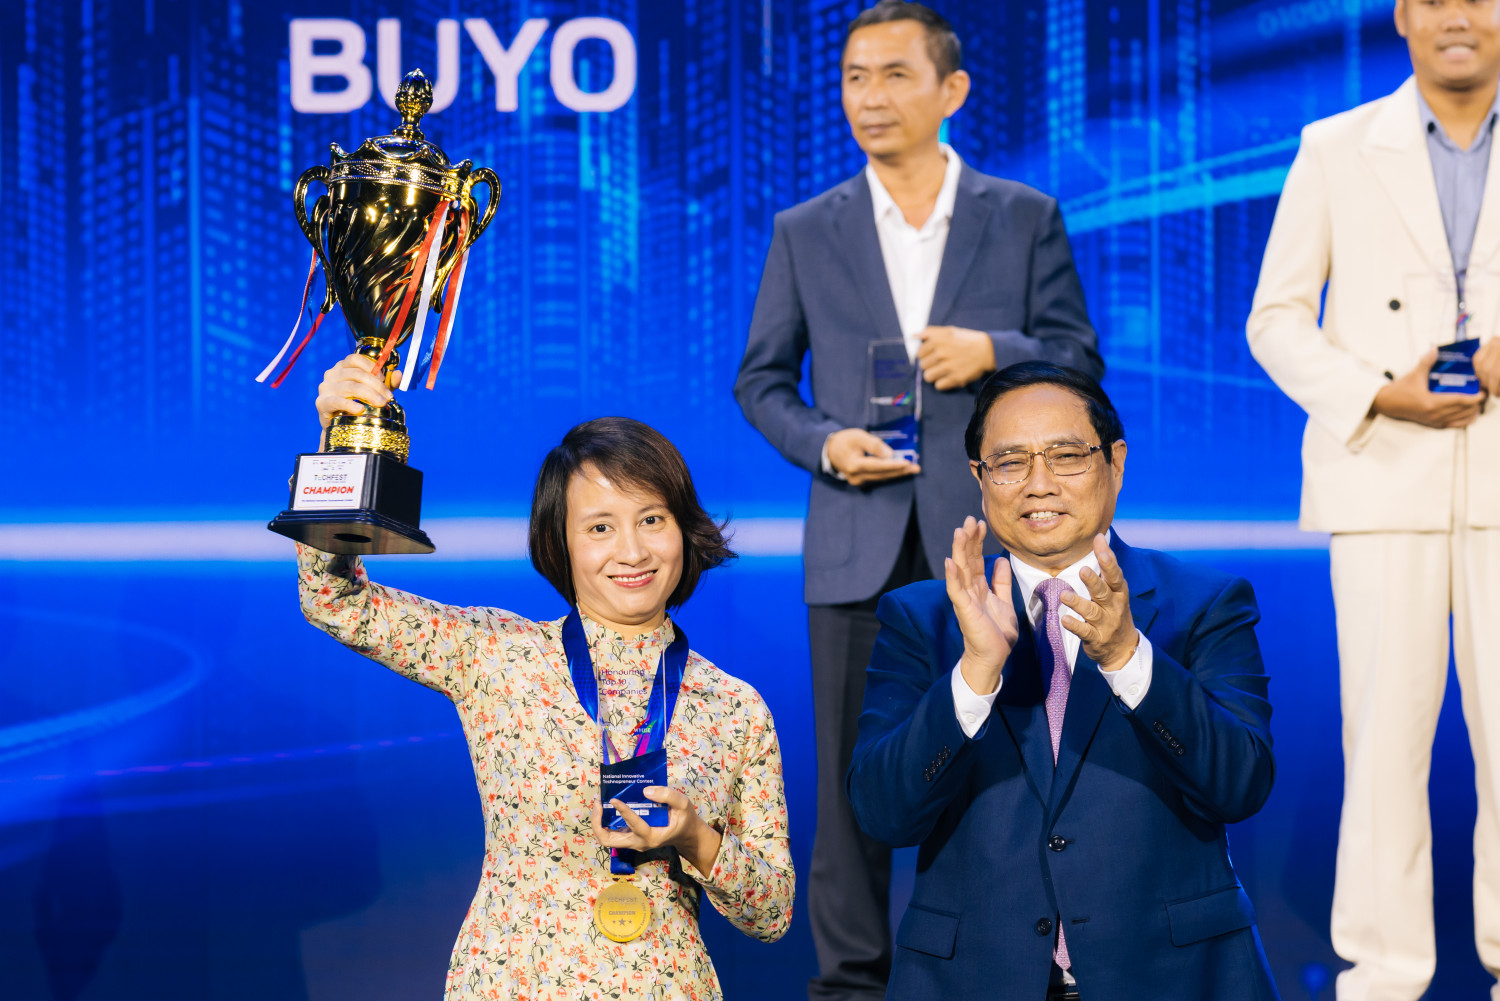 BUYO received champion cup from the PRIME MINISTER OF VIETNAM